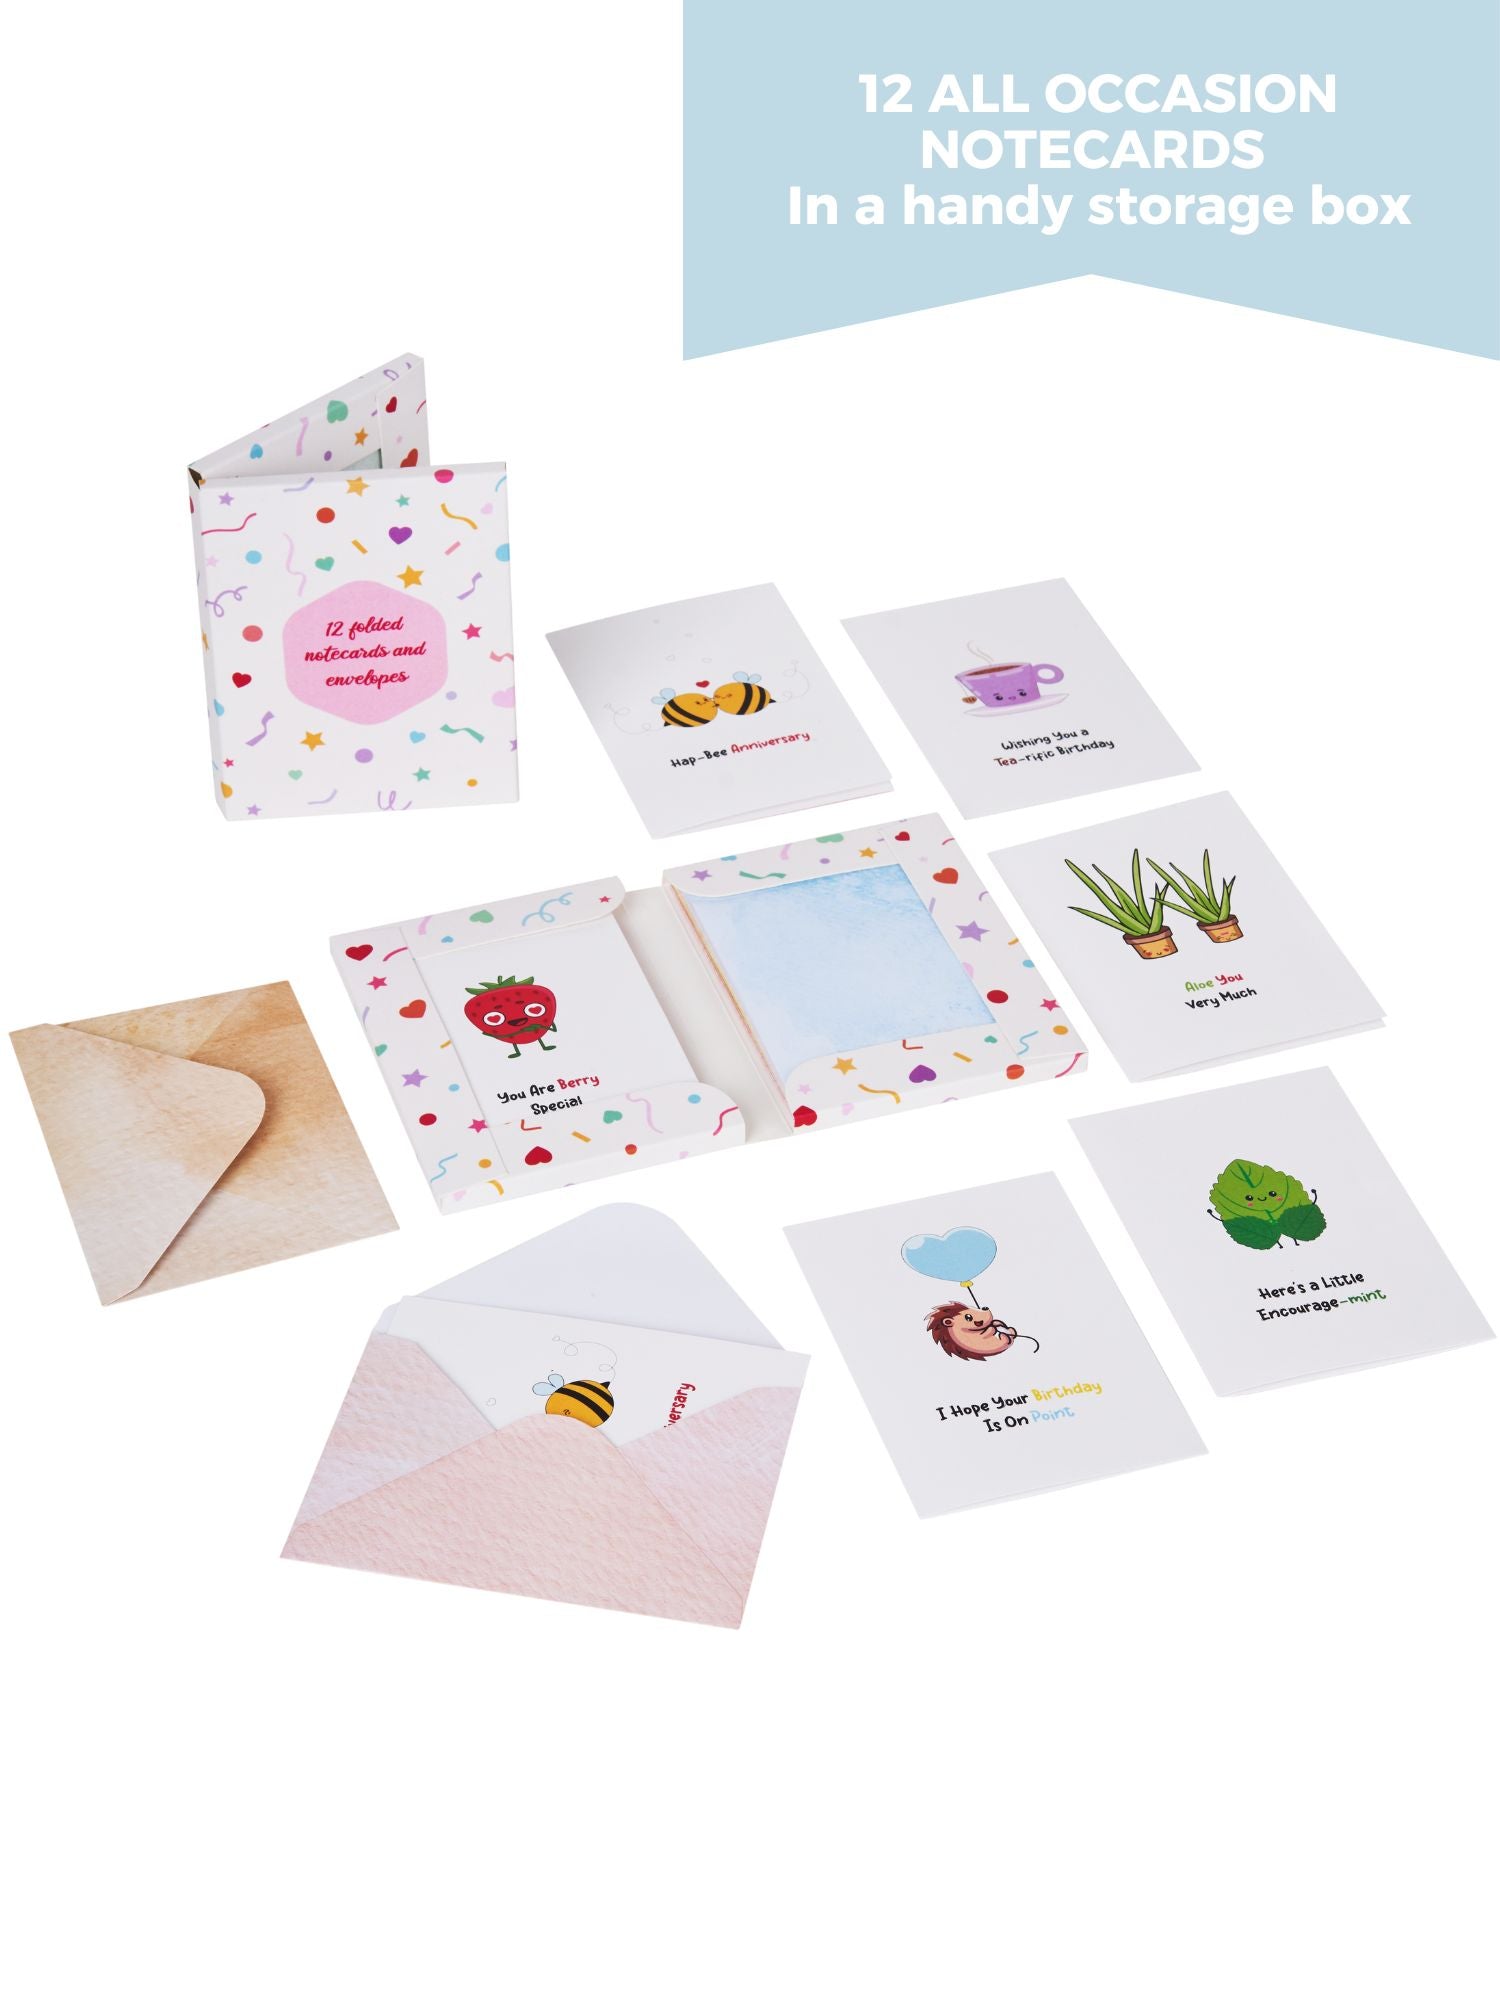 Doodle Set of 12 Blank Notecards with Coloured Envelopes and Jacket Style Packaging (Pun intended I)